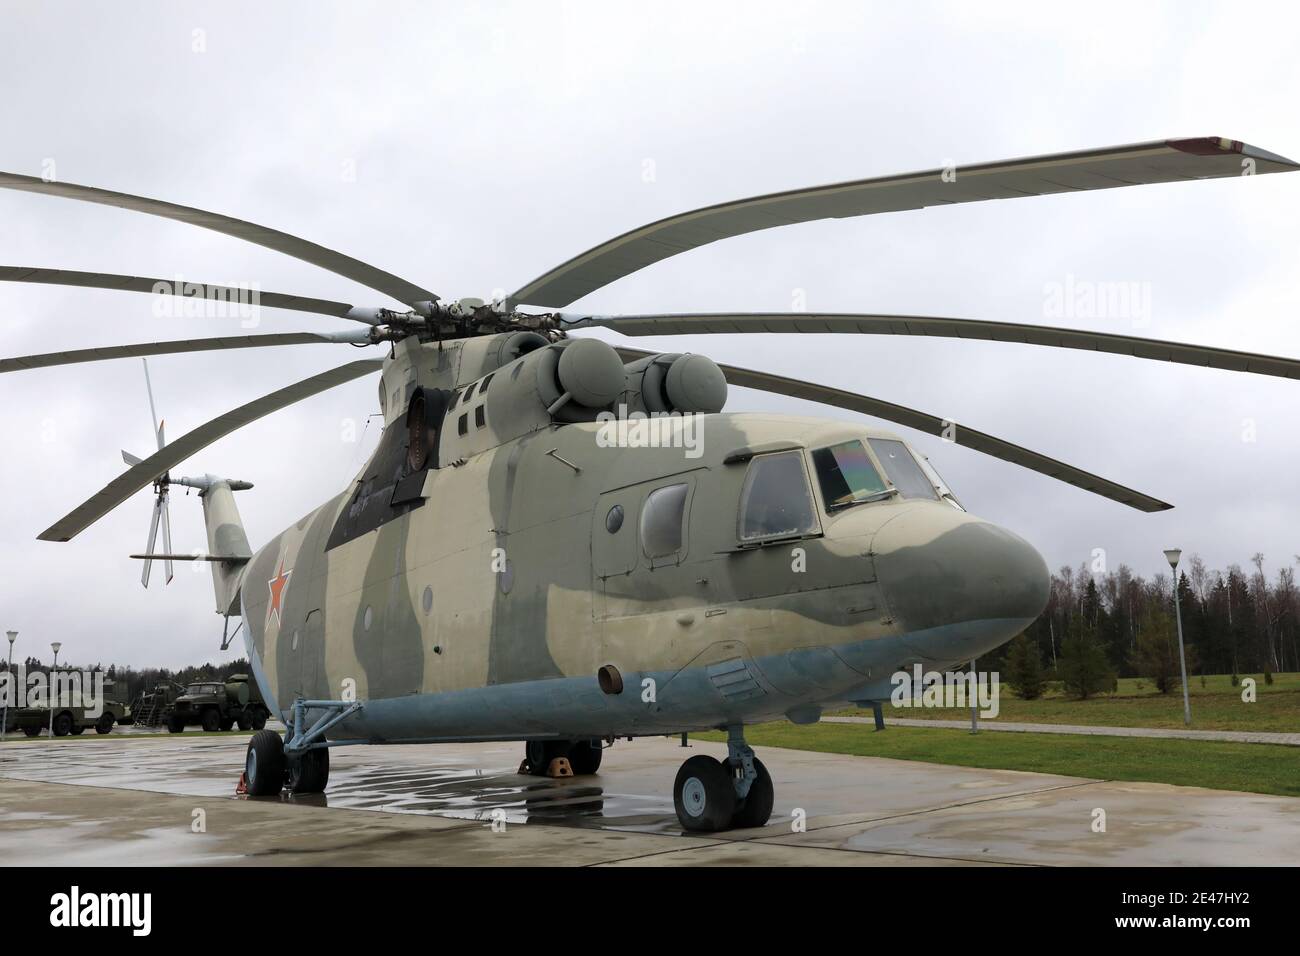 Russian military transport helicopter Halo on aerodrome Stock Photo